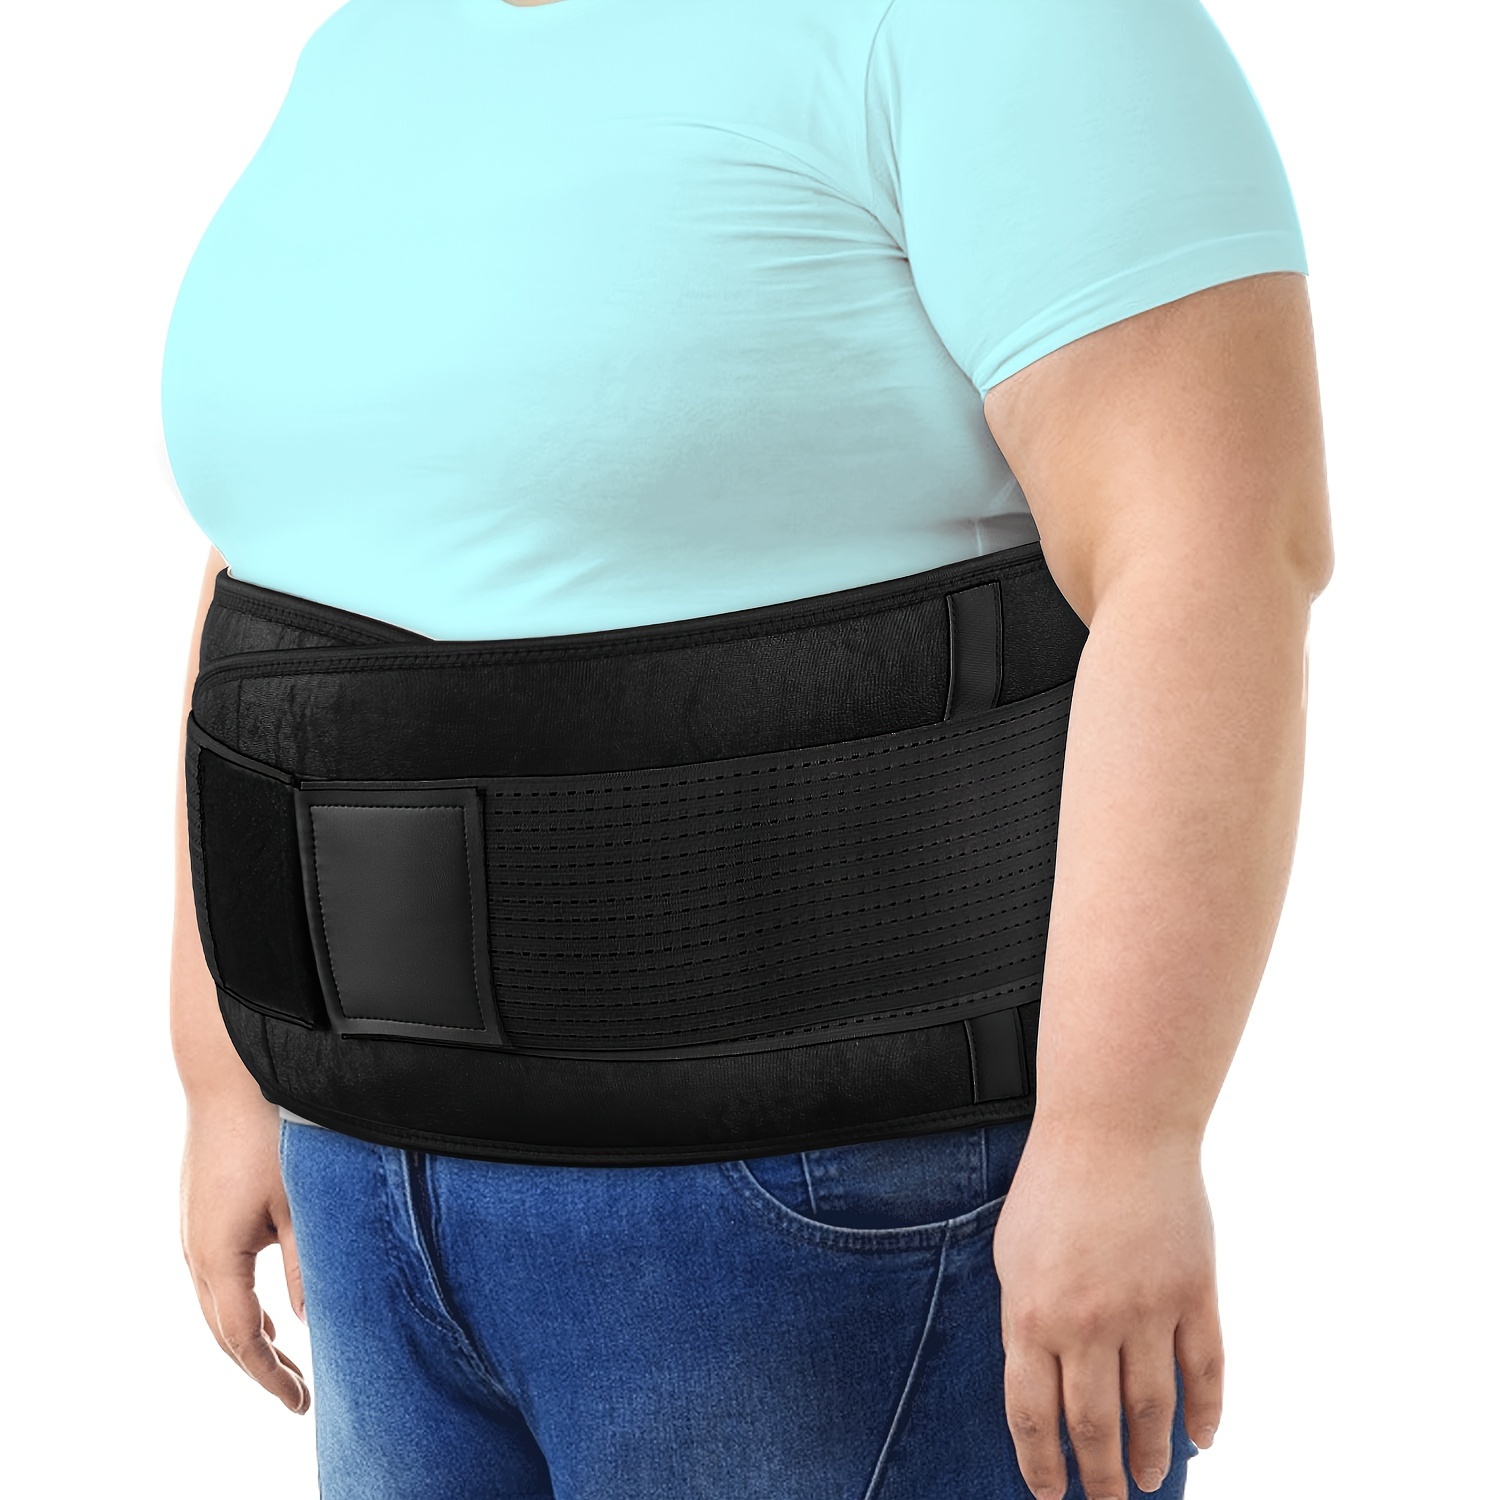 

Back Brace For Lower - Lumbar Support, Sciatica, Herniated Disc, Scoliosis And More - Adjustable Support Straps - Lower Back Belt For Women And Men